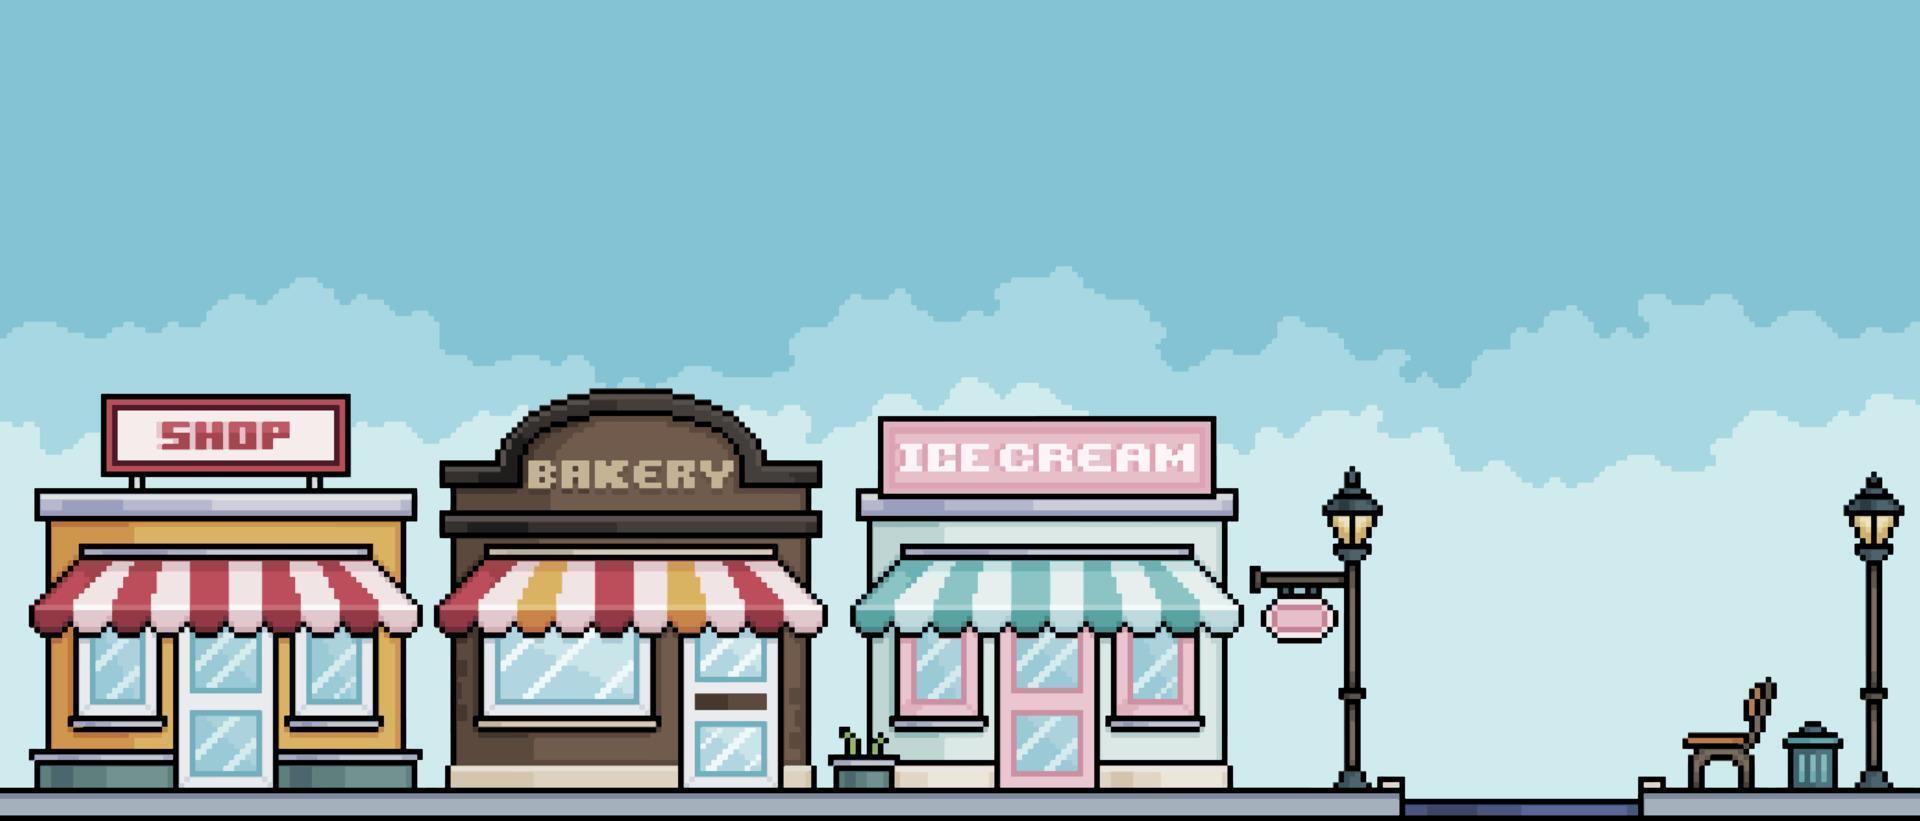 Pixel art shopping street and square with shops, bakery, ice cream. Urban landscape Cityscape background for 8bit game vector